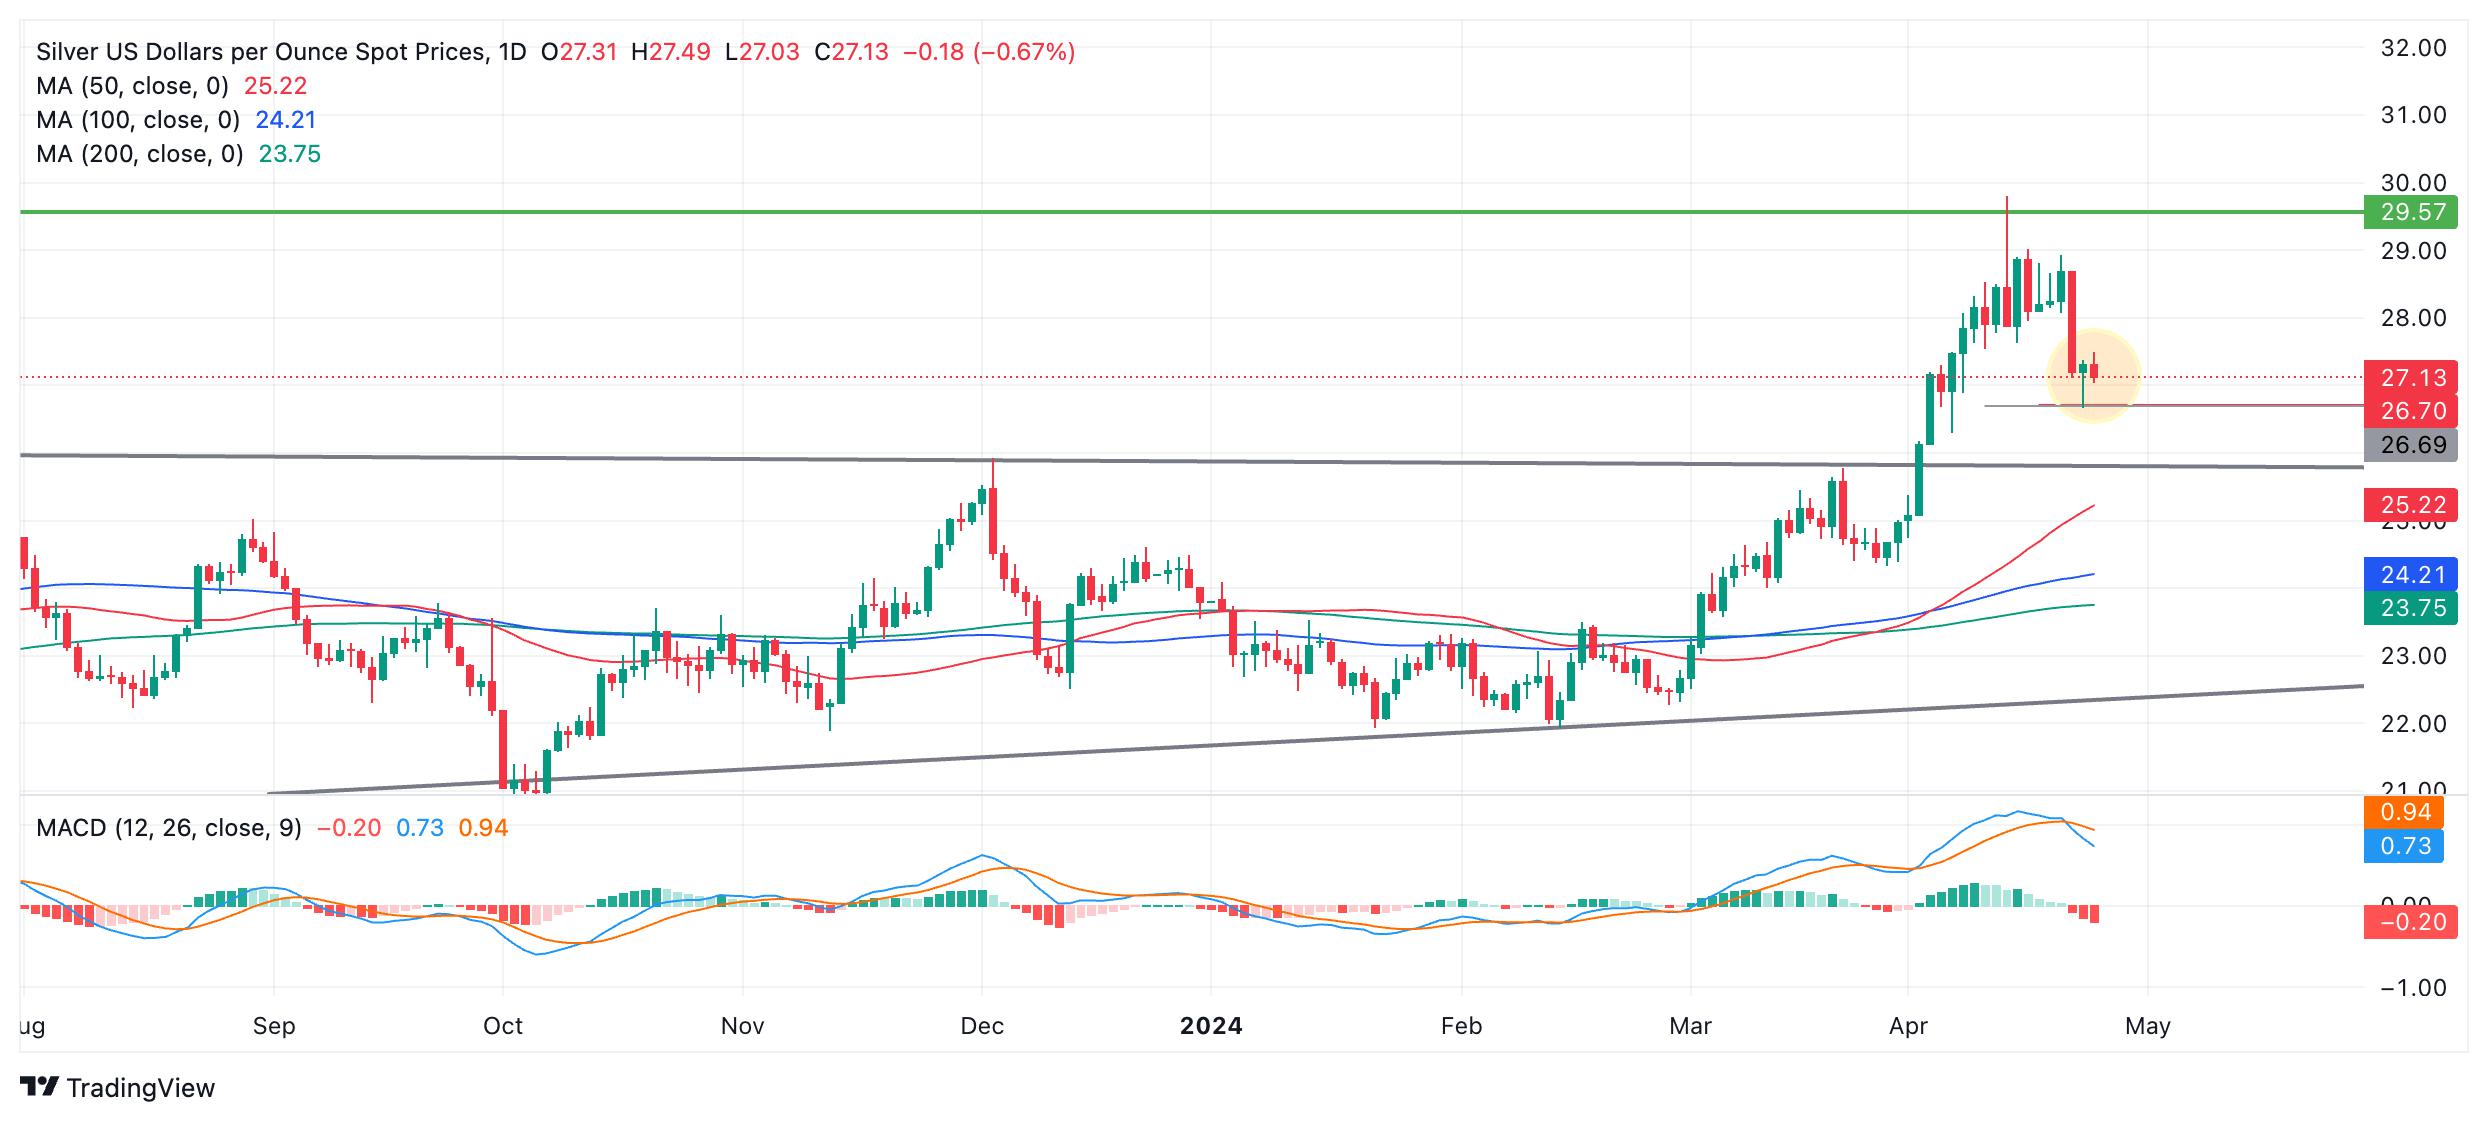 Silver Price Analysis: Silver price finds floor but is still at risk of more weakness